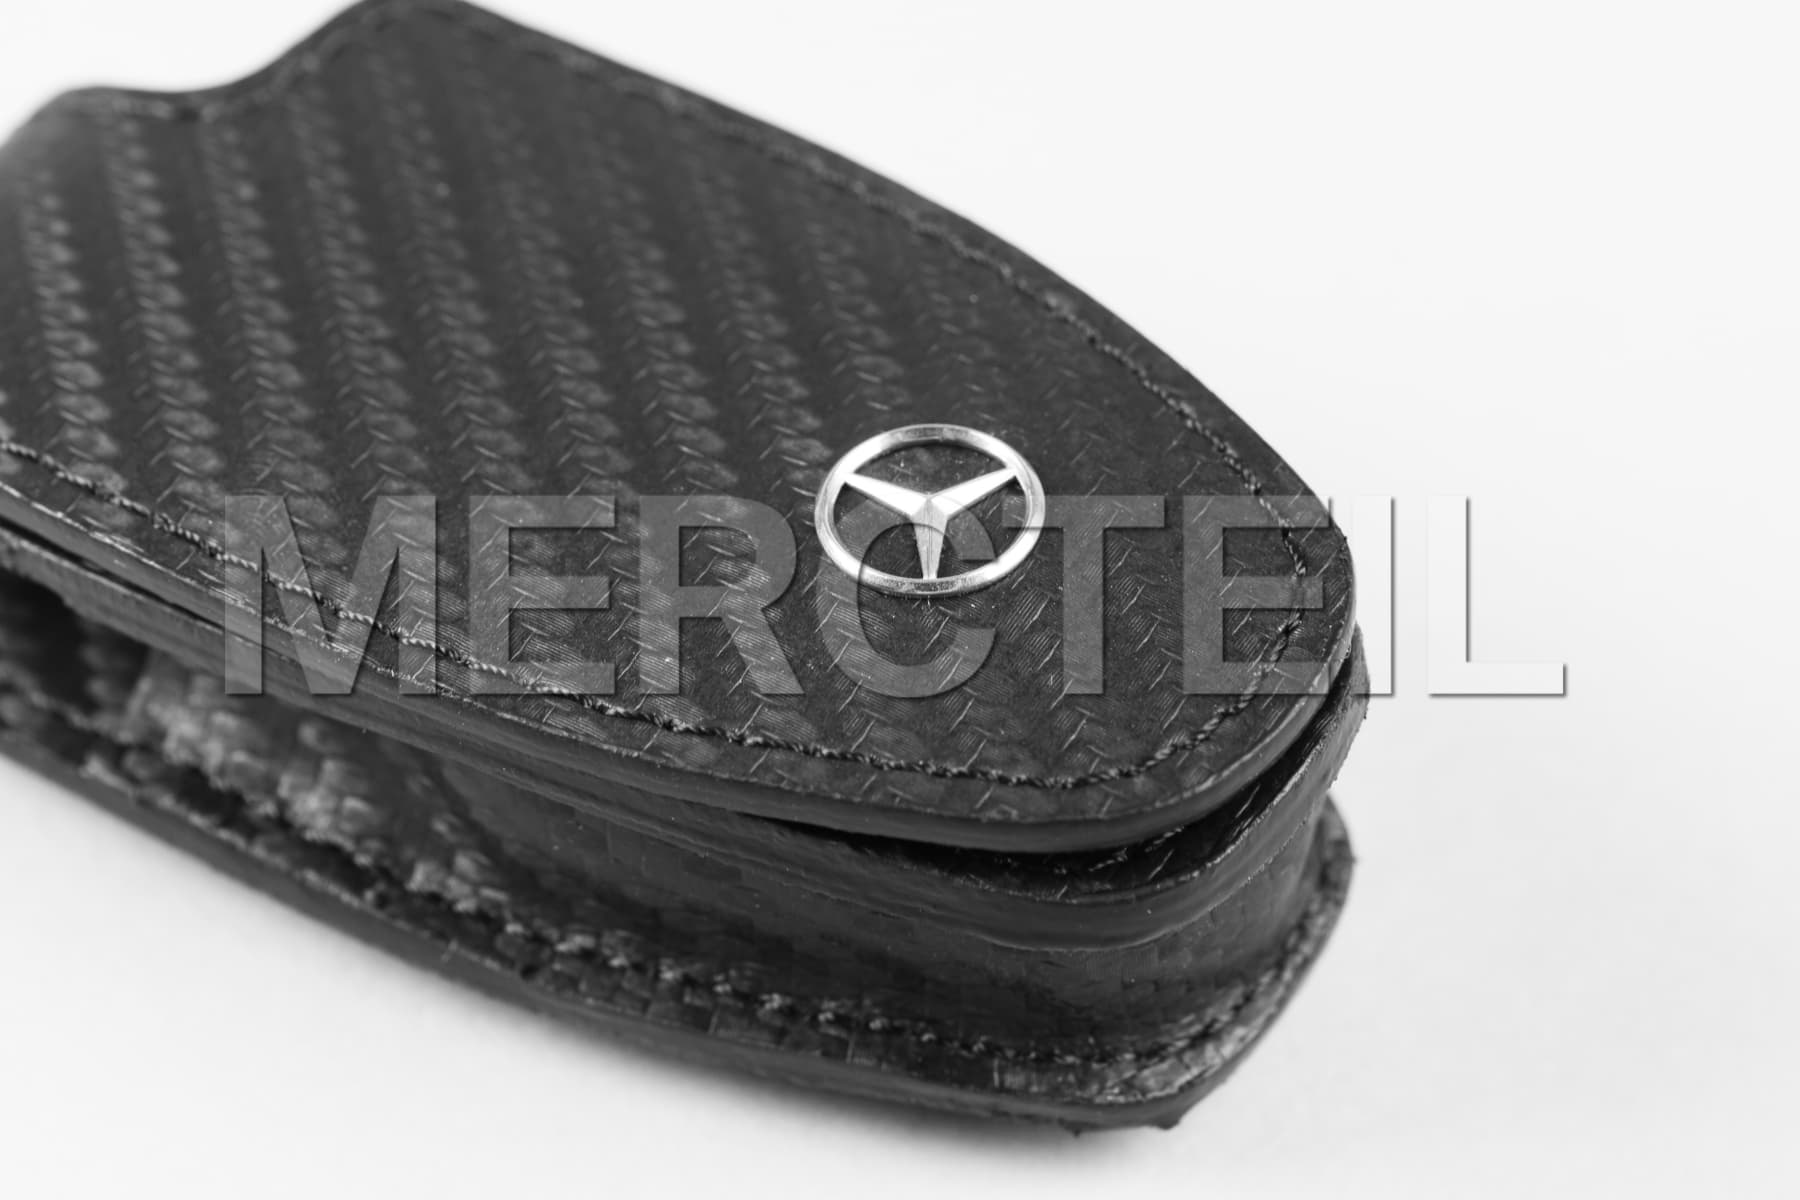 Carbon Style Key Wallet 5th Generation Genuine Mercedes Benz (part number: B66958407)